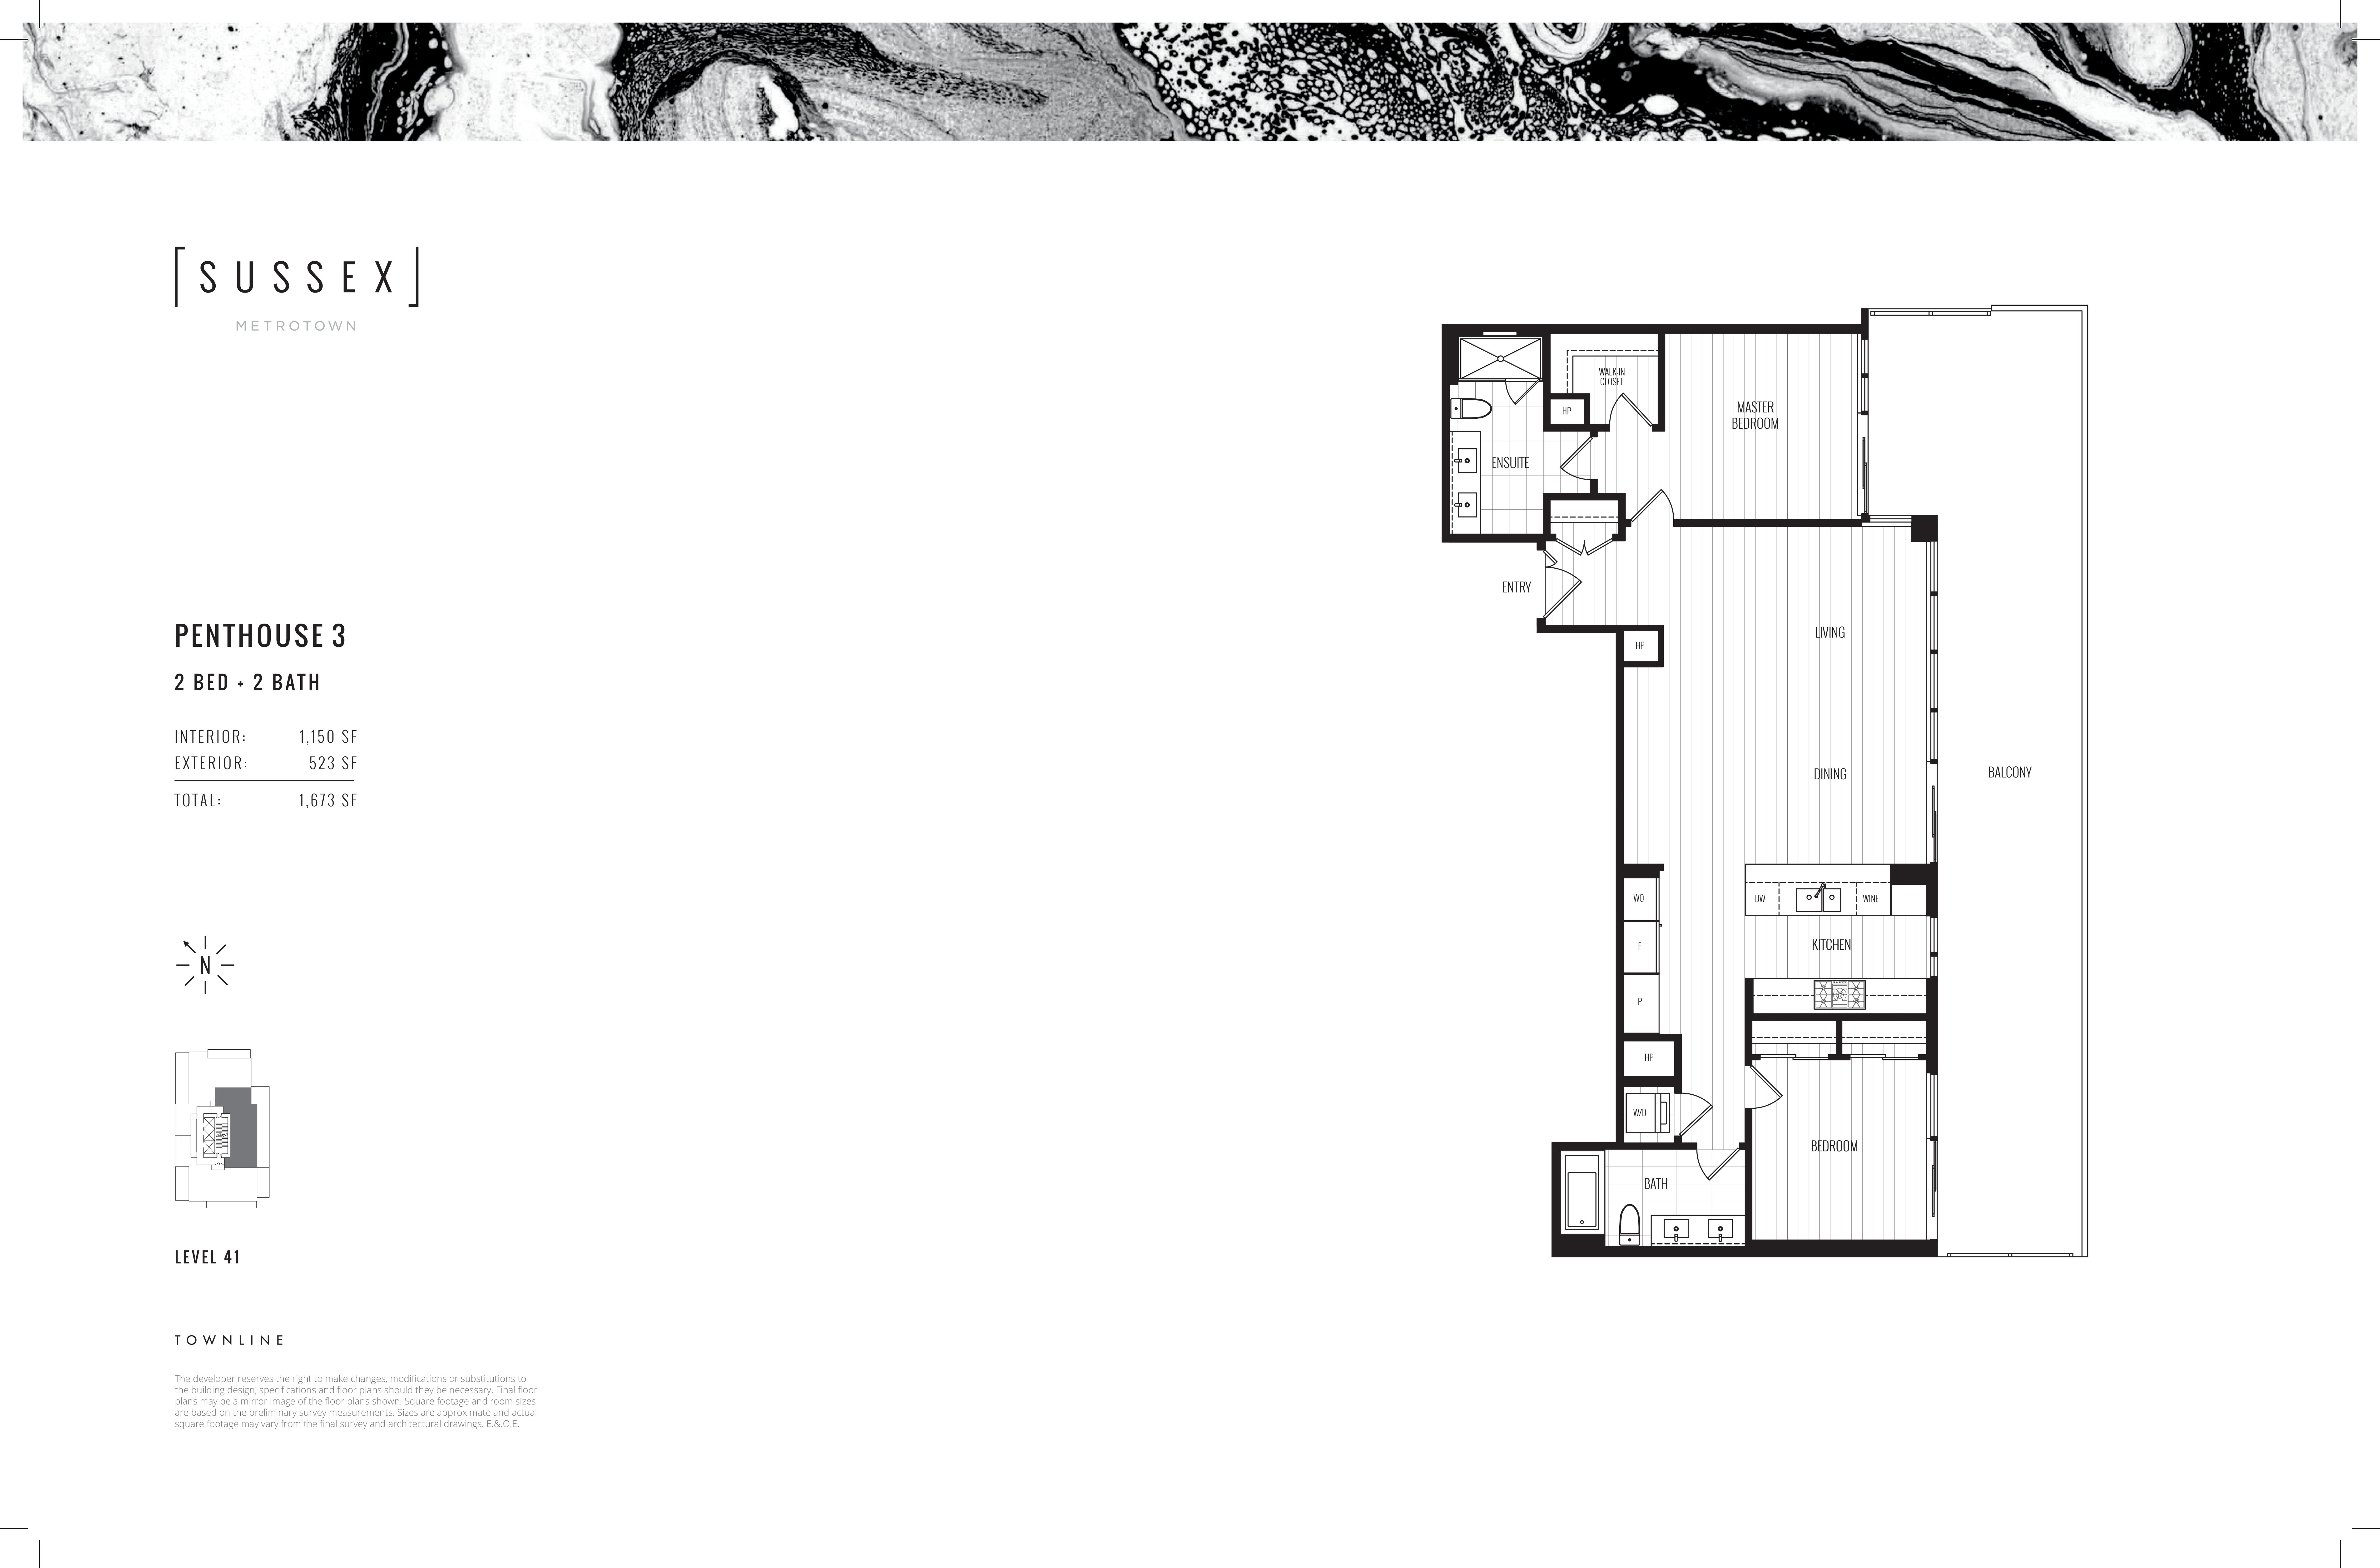  PH 3  Floor Plan of Sussex Condos with undefined beds